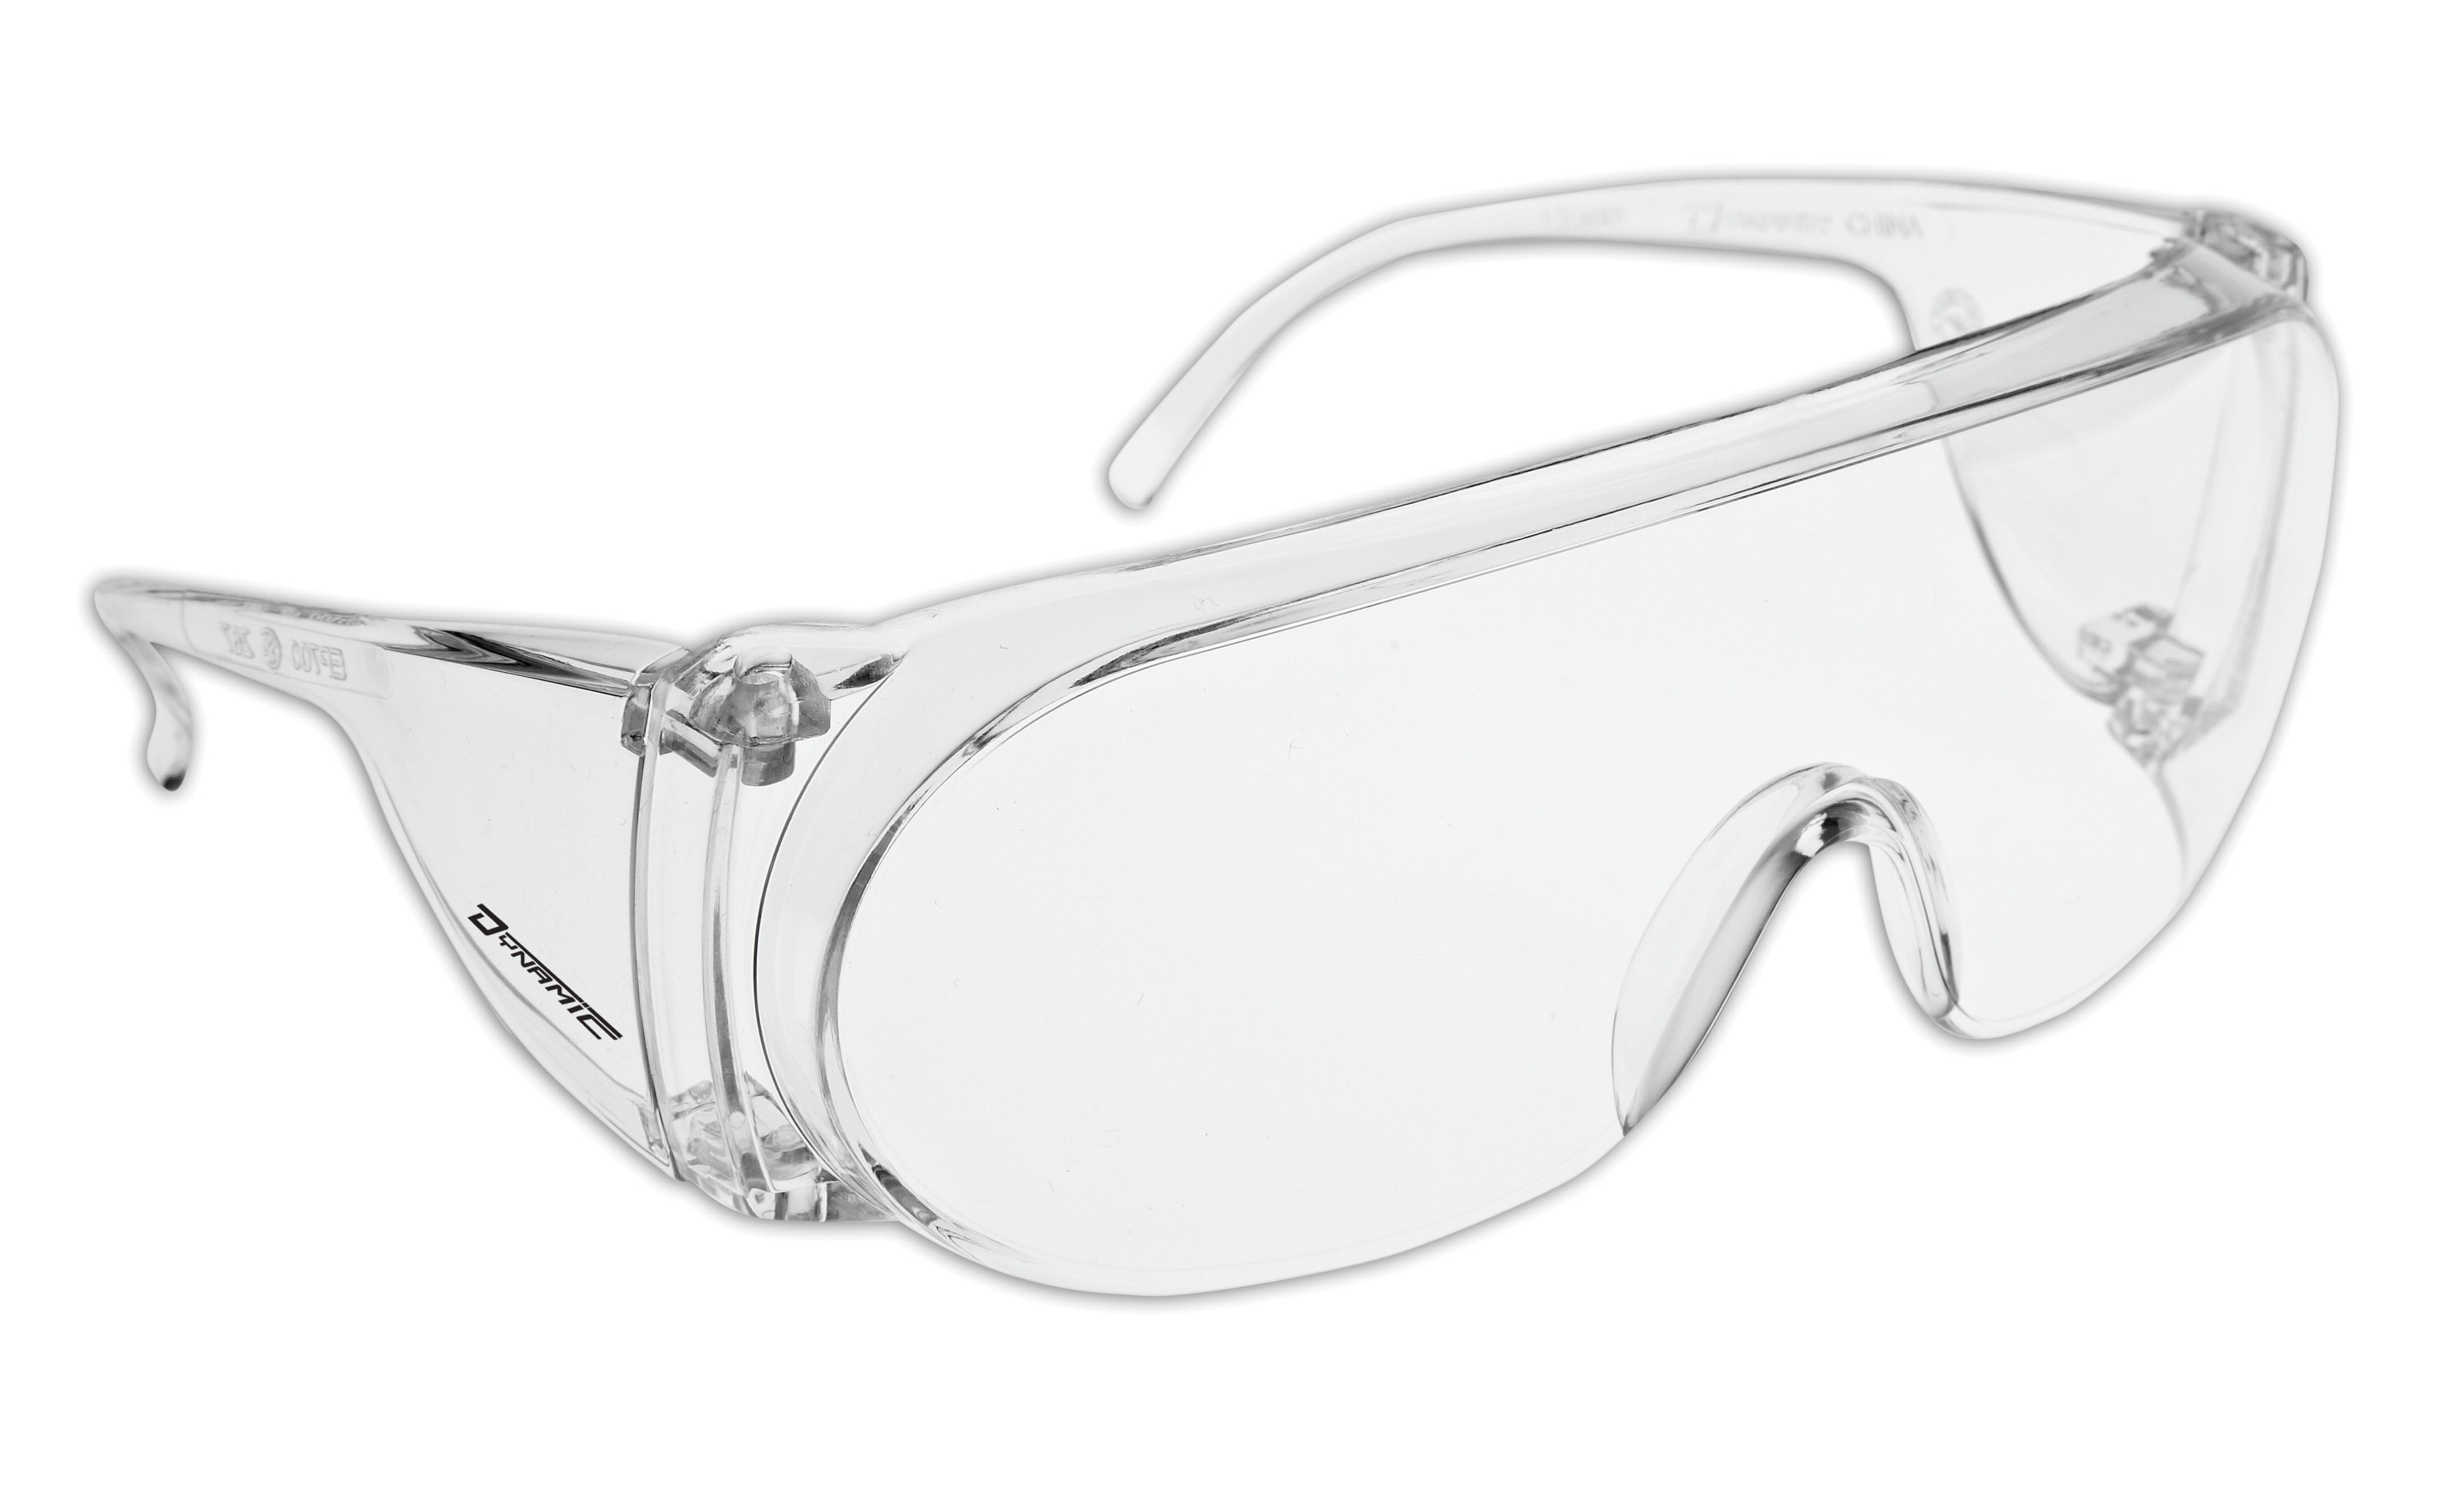 The "Visitor" CSA Safety Glasses